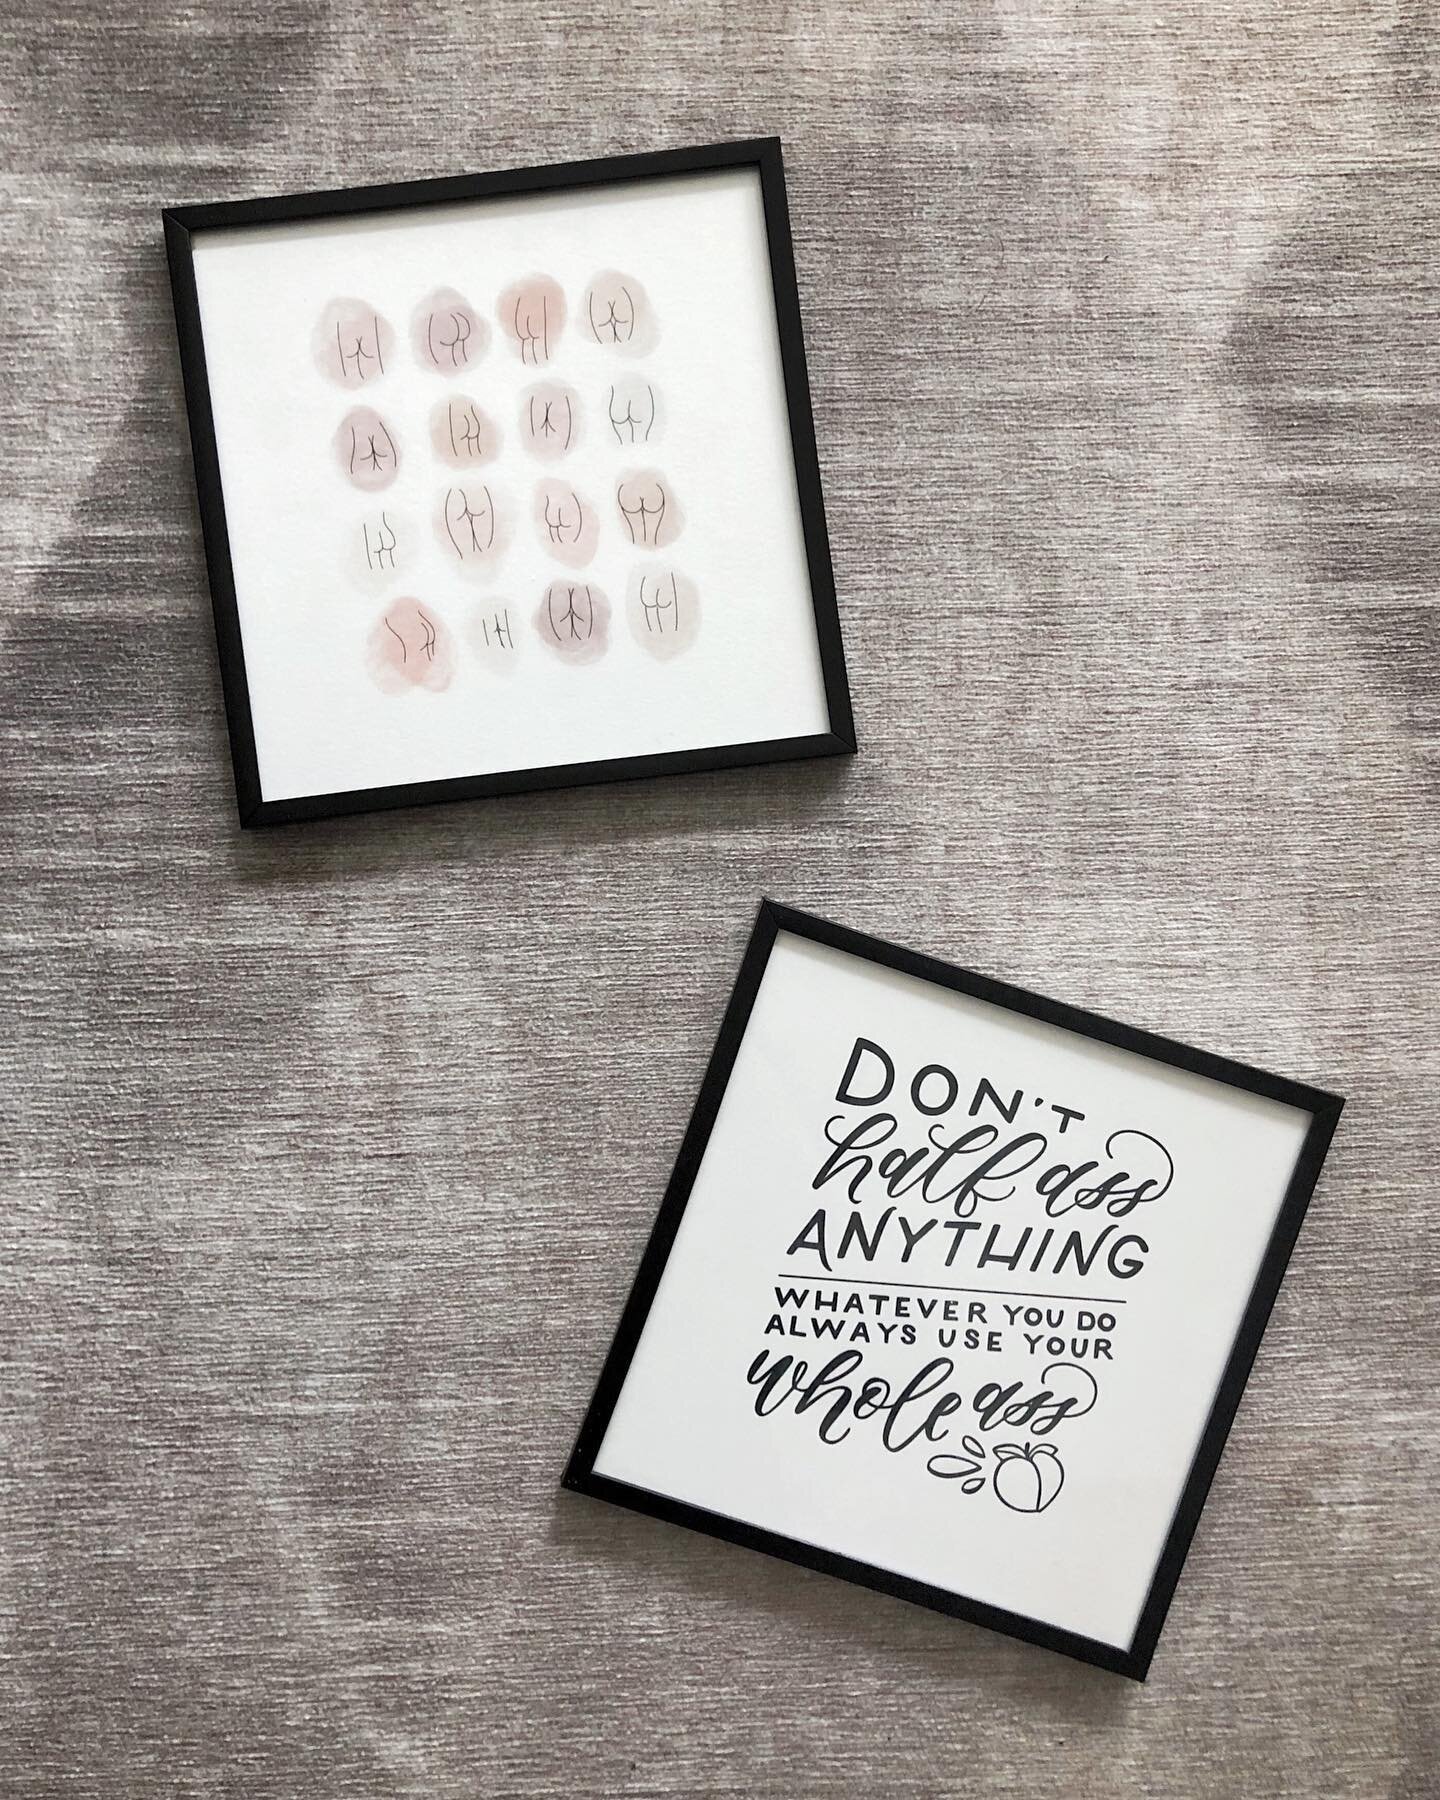 Have been really quiet here because quite frankly I haven&rsquo;t been creating much. Been collecting some plants and looking up new recipes and took a little break from lettering and weddings... but I did draw and frame up some butts inspired by pri